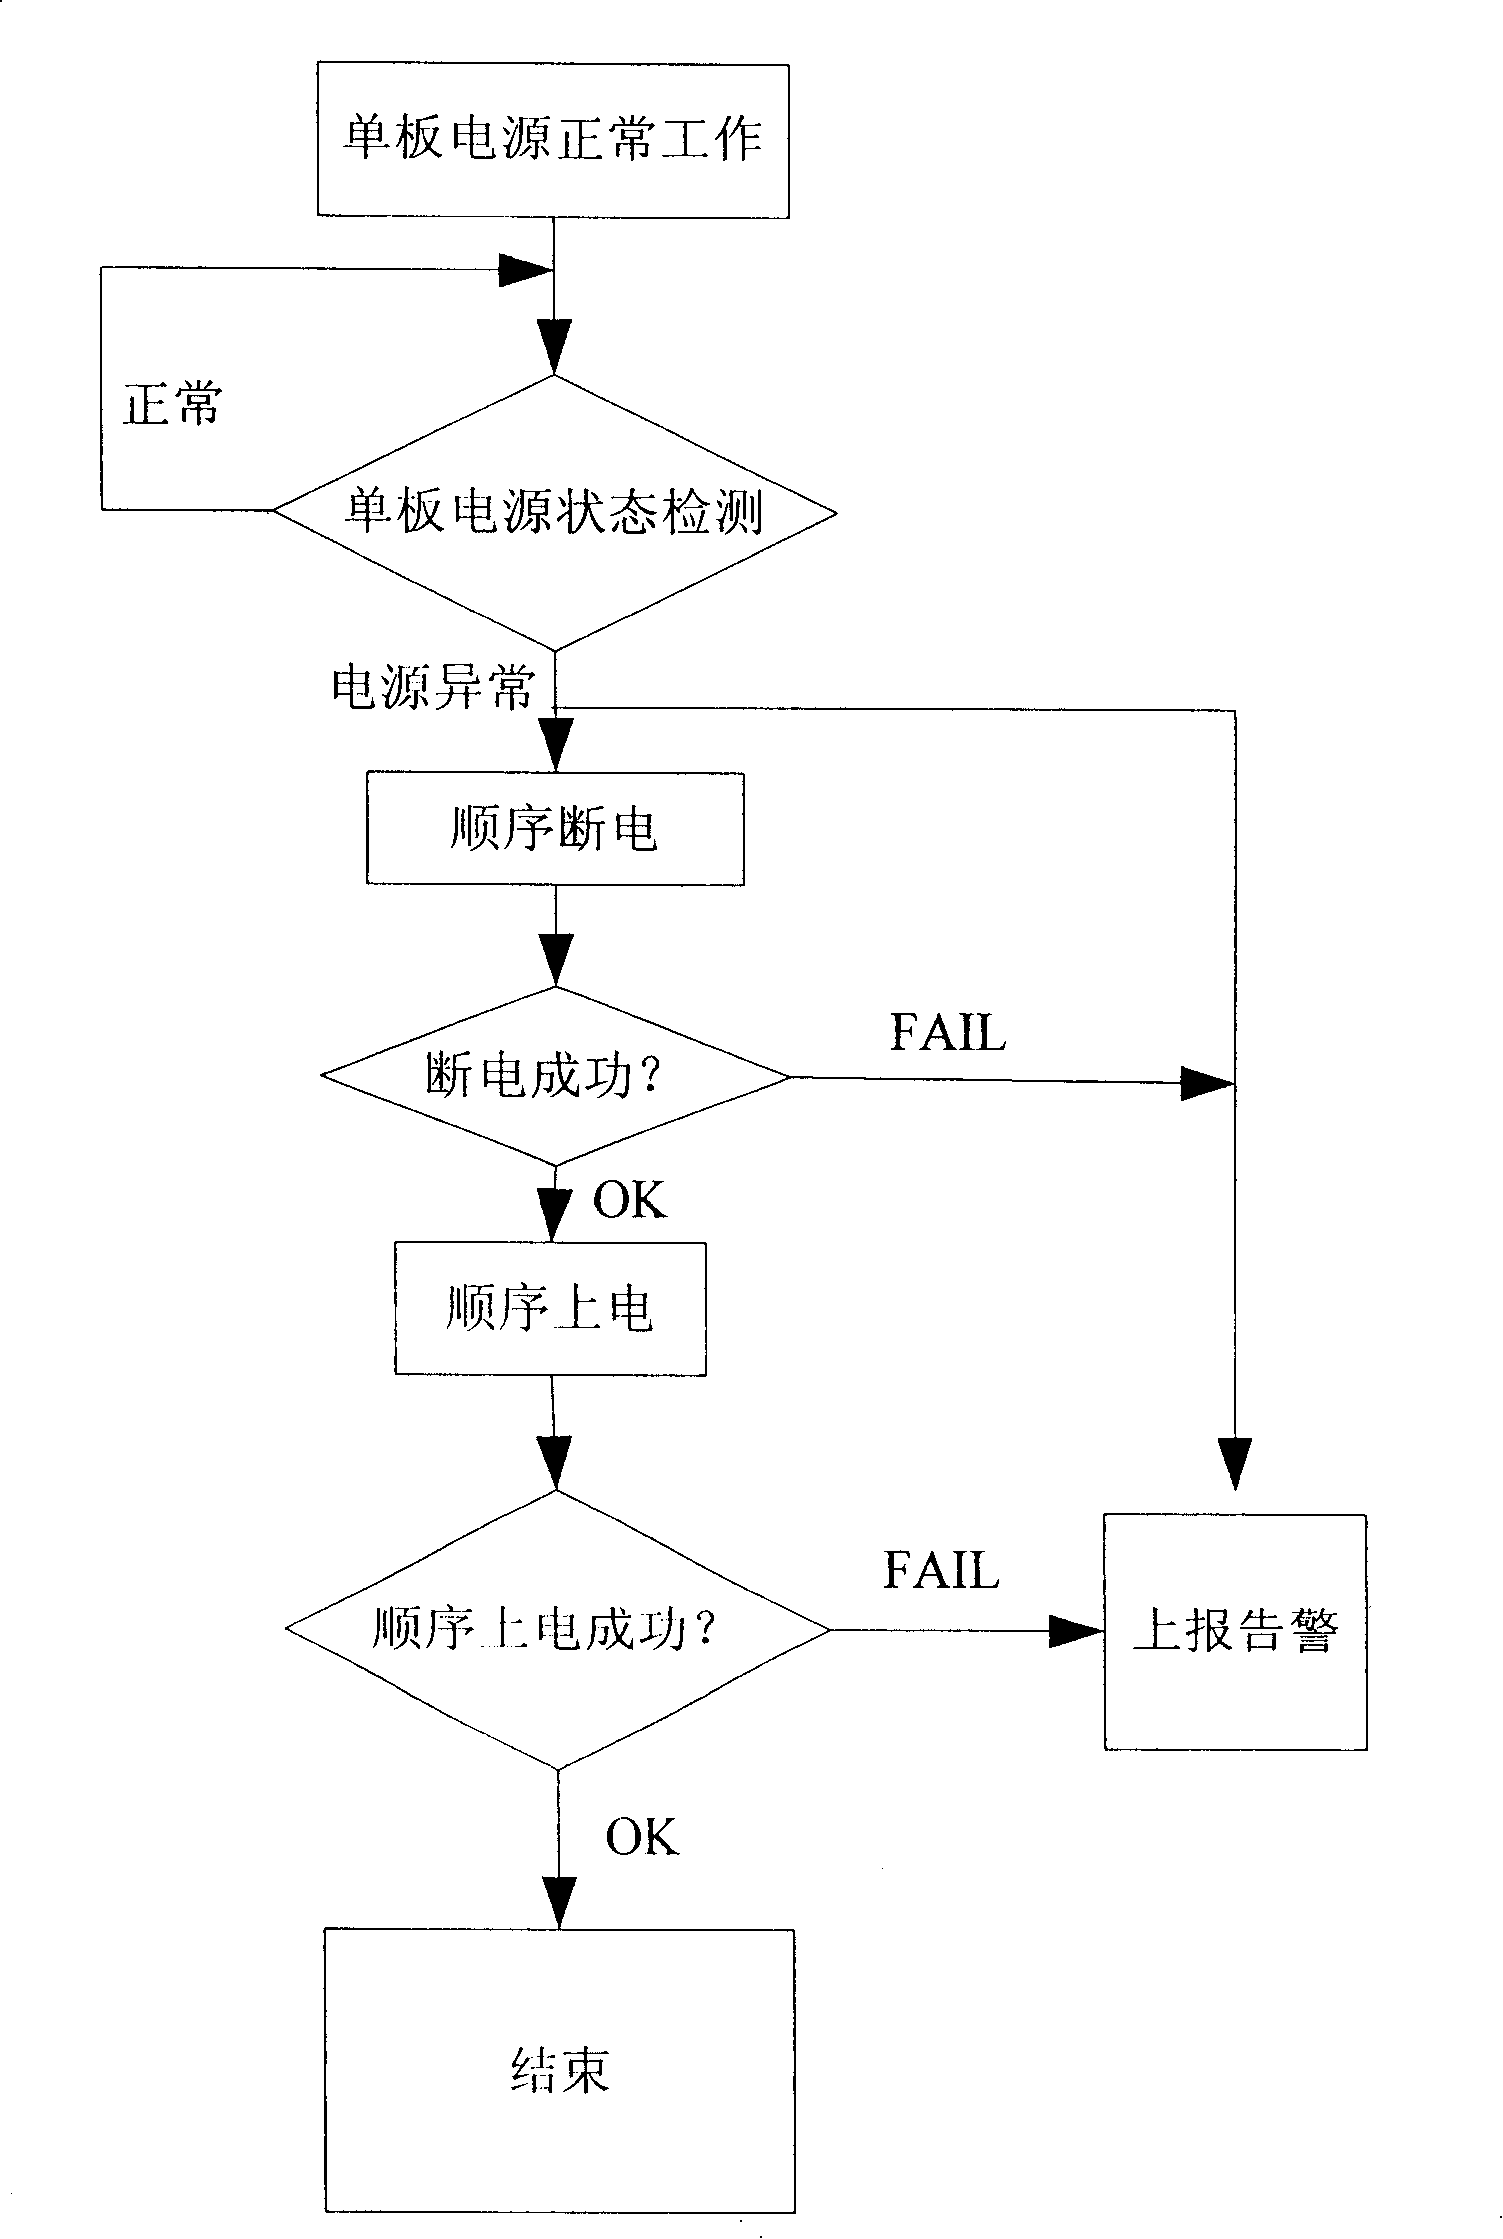 Implementation device and method for multi-voltage monitoring and protection